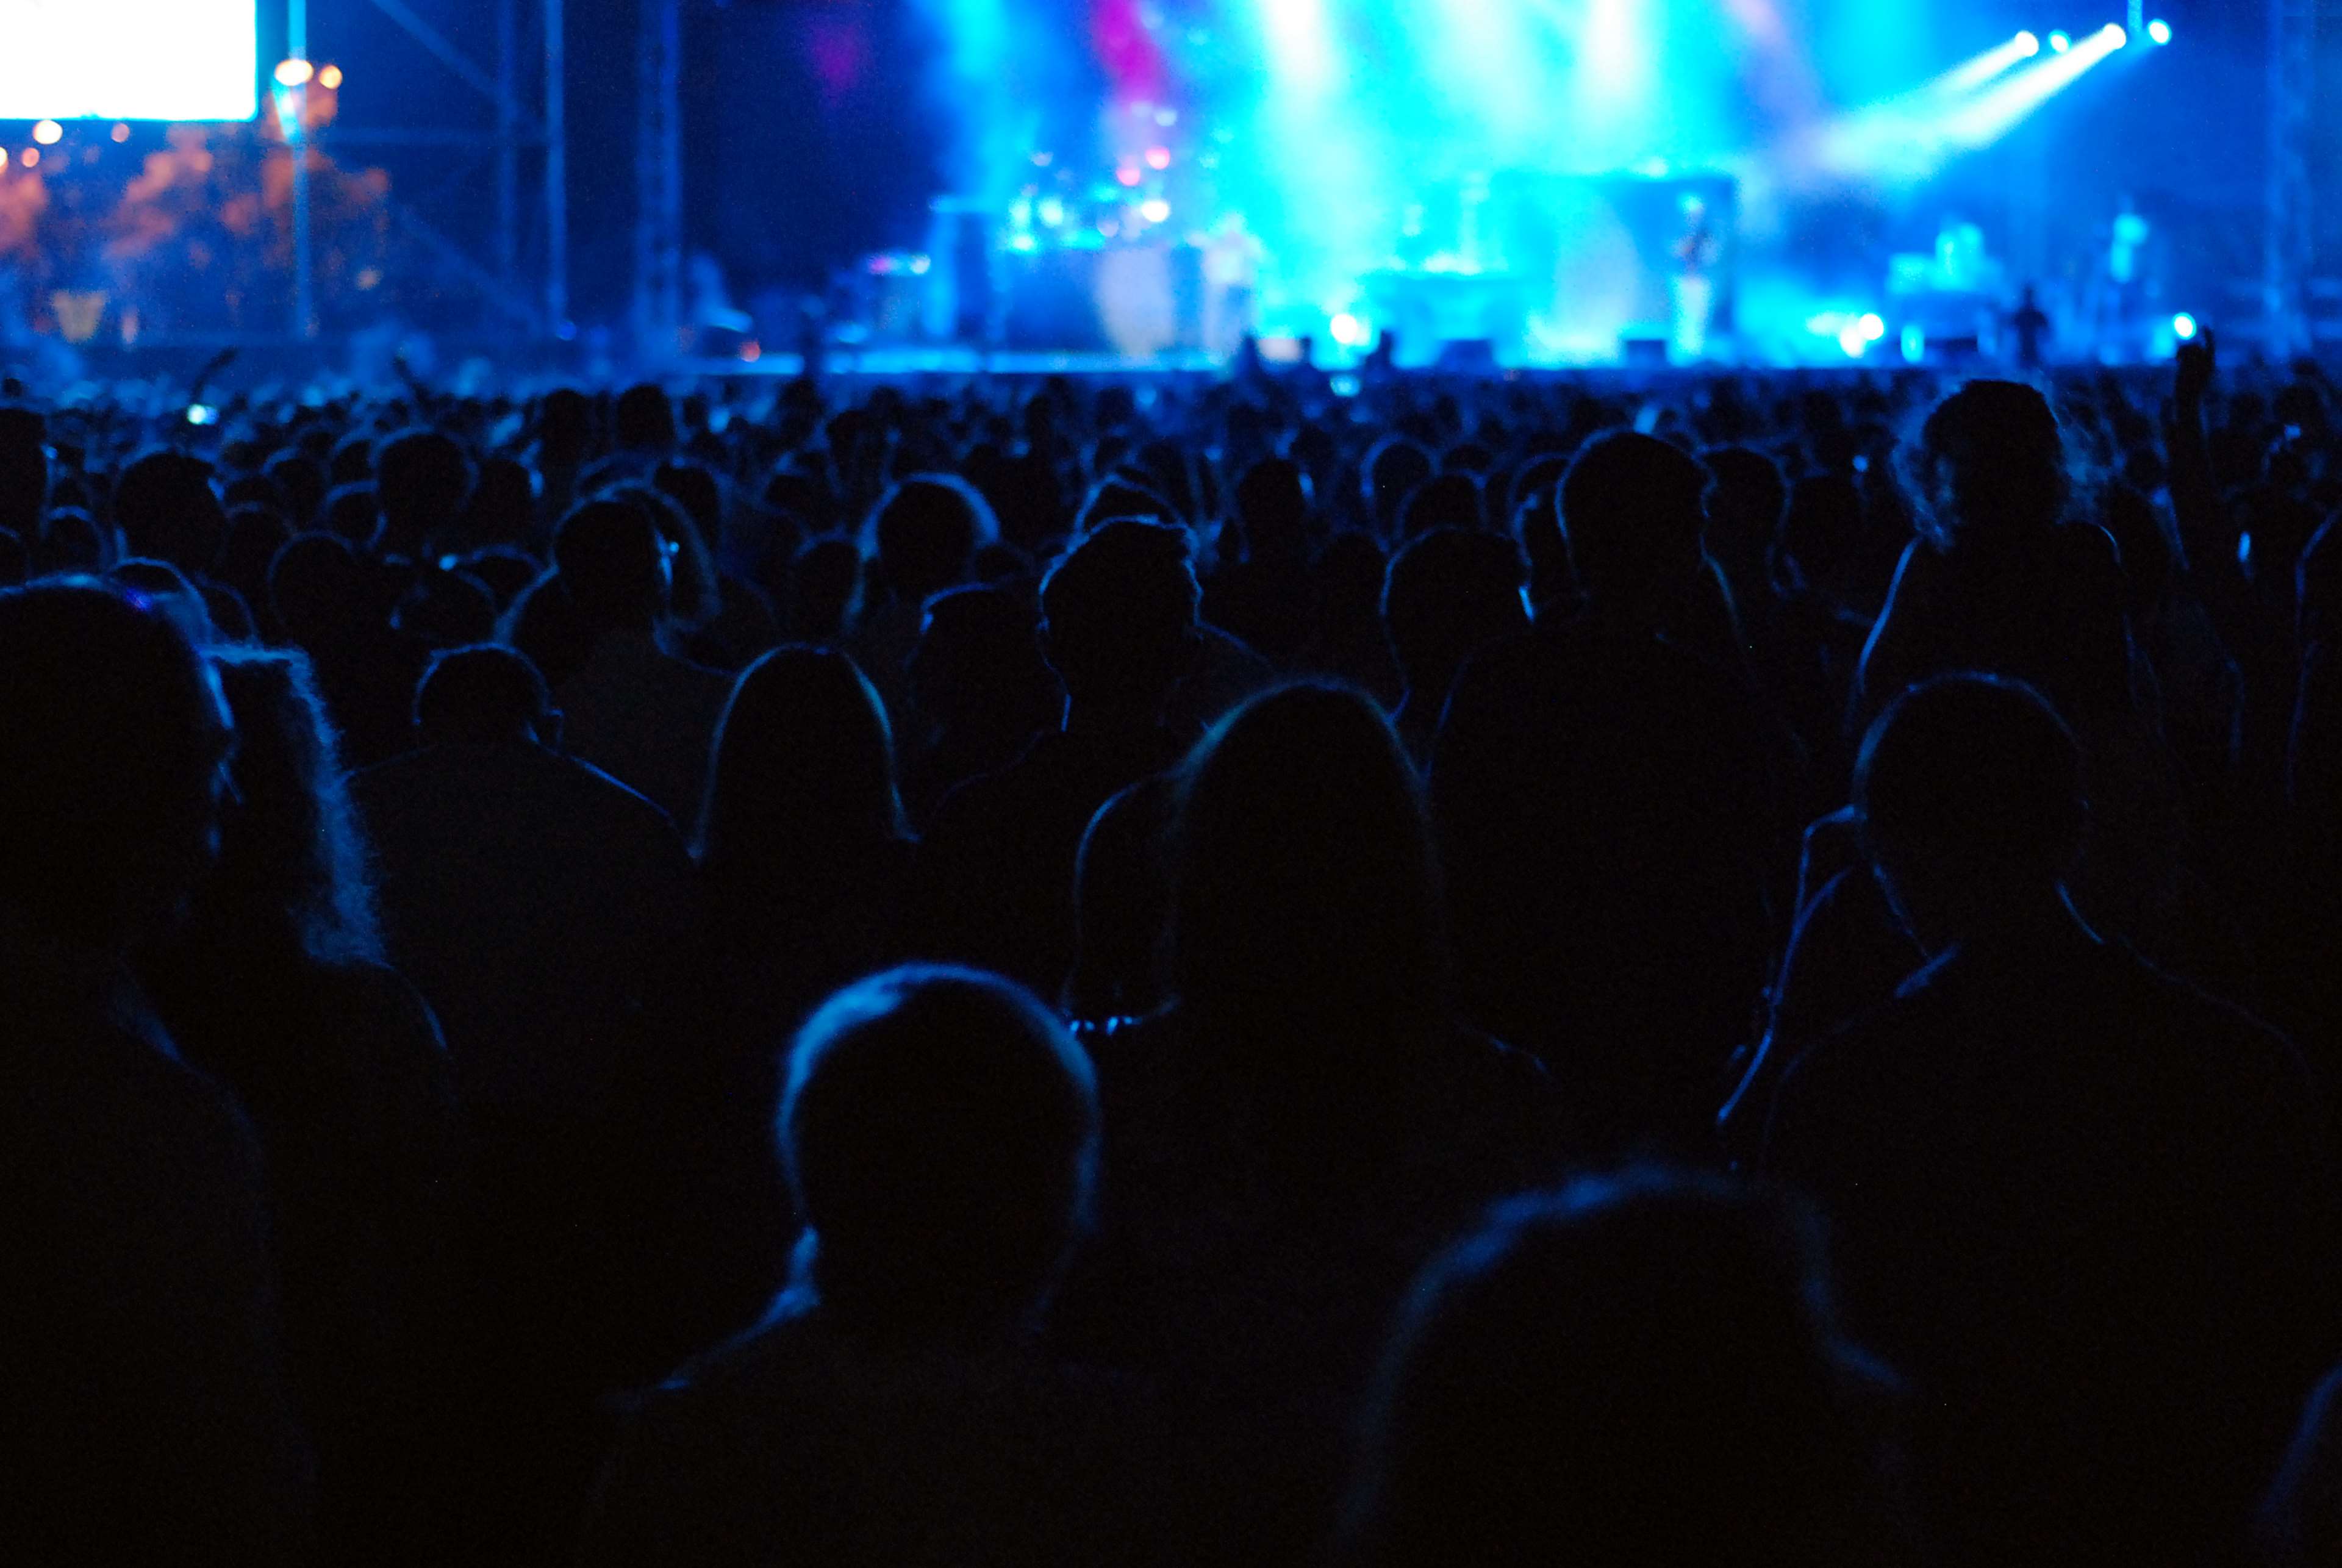 audience, concert, crowd, festival, nightlife, party, people, performance, stage 4k wallpaper